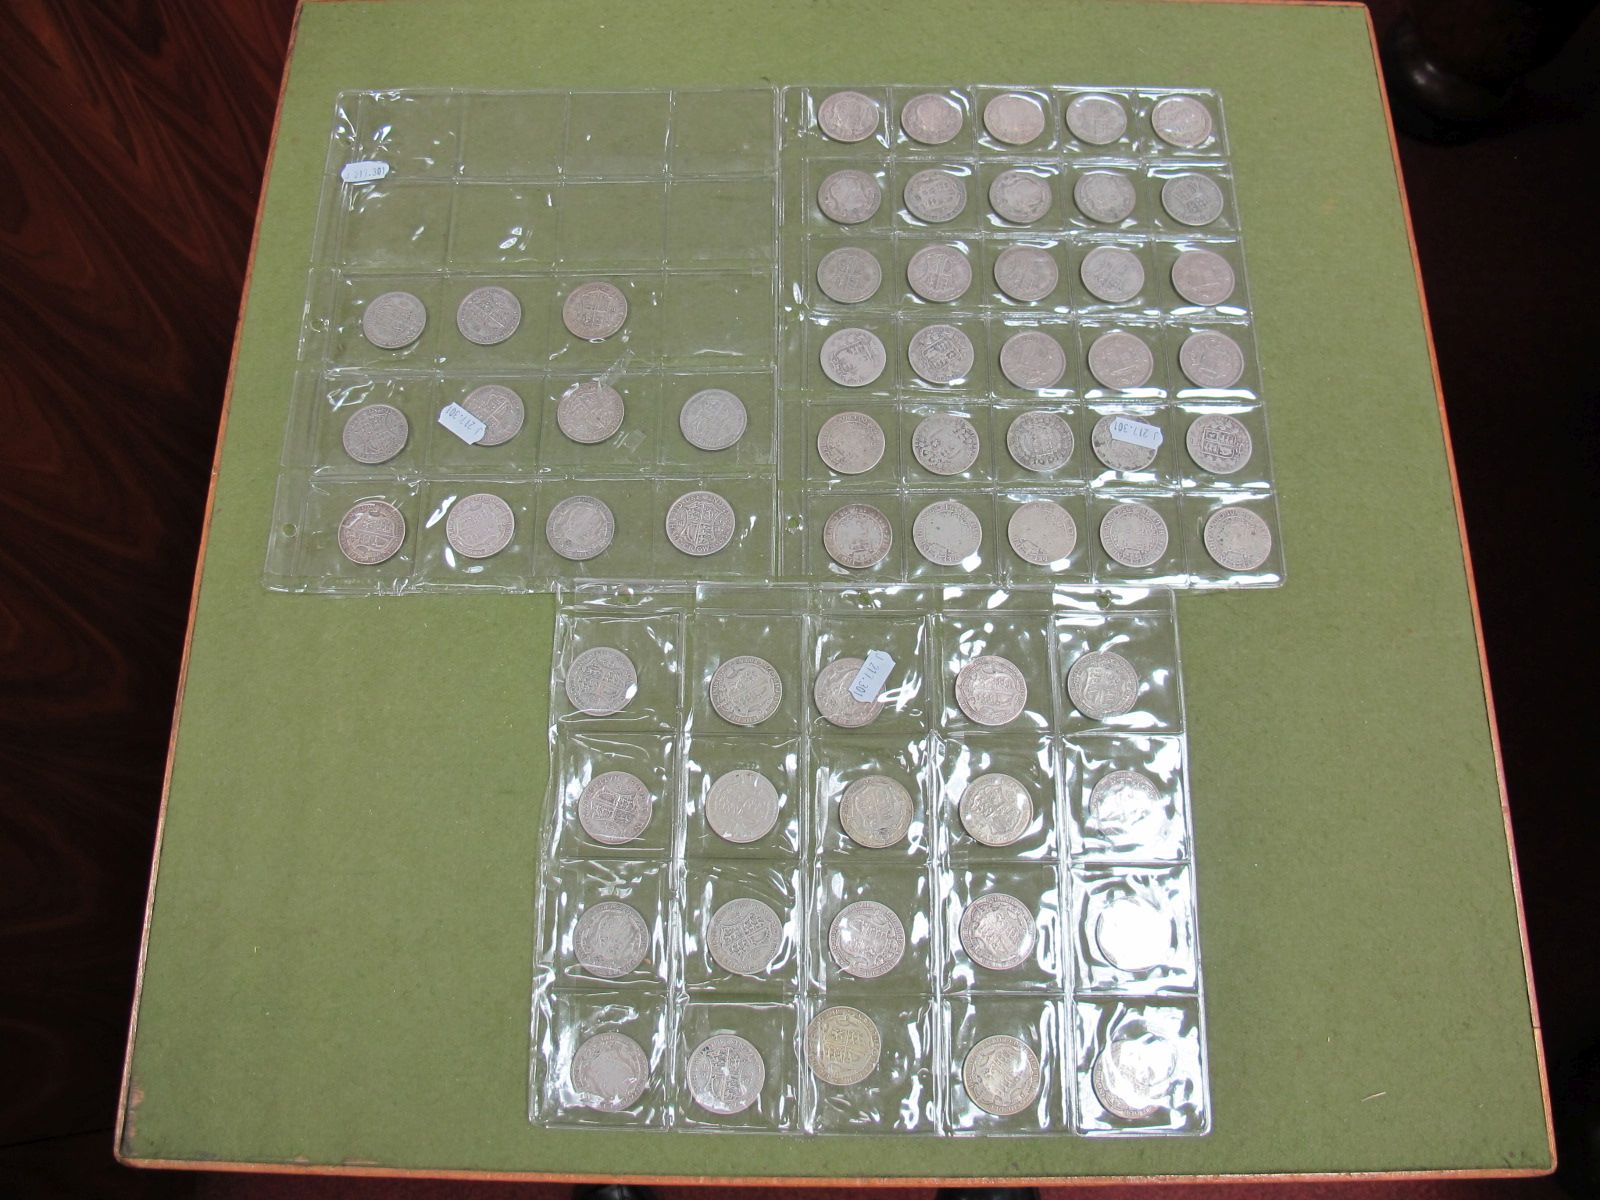 A Collection of Sixty-One Halfcrowns from Circulation. Fifty-seven of the coins are pre-1947 (